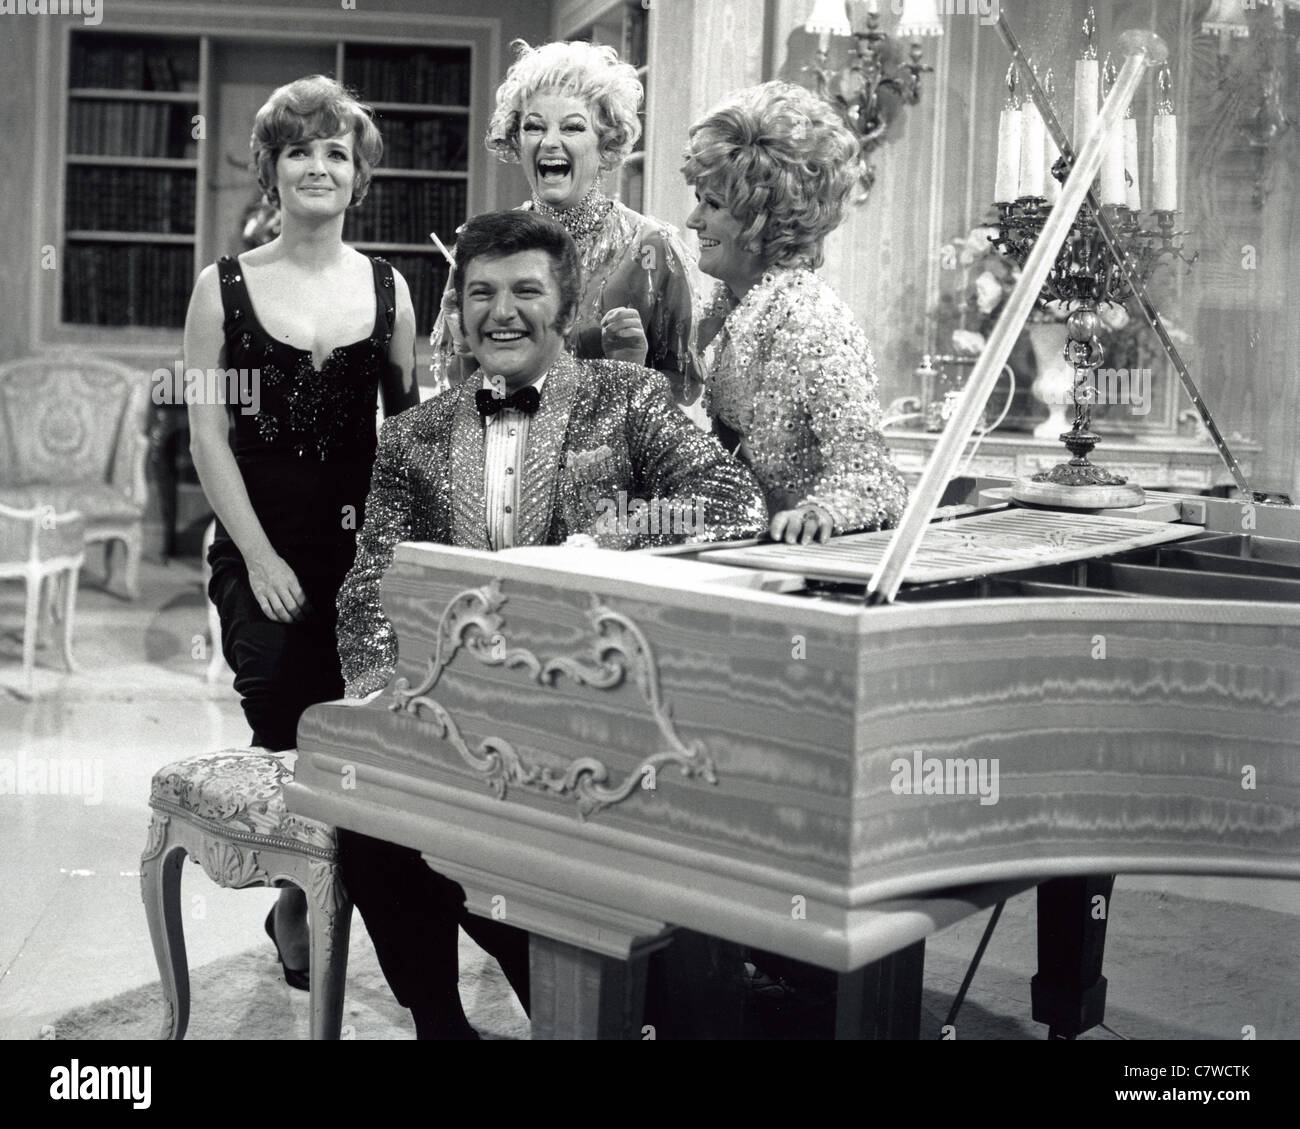 liberace-us-entertainer-with-gusts-on-his-us-tv-show-in-1969-from-C7WCTK.jpg